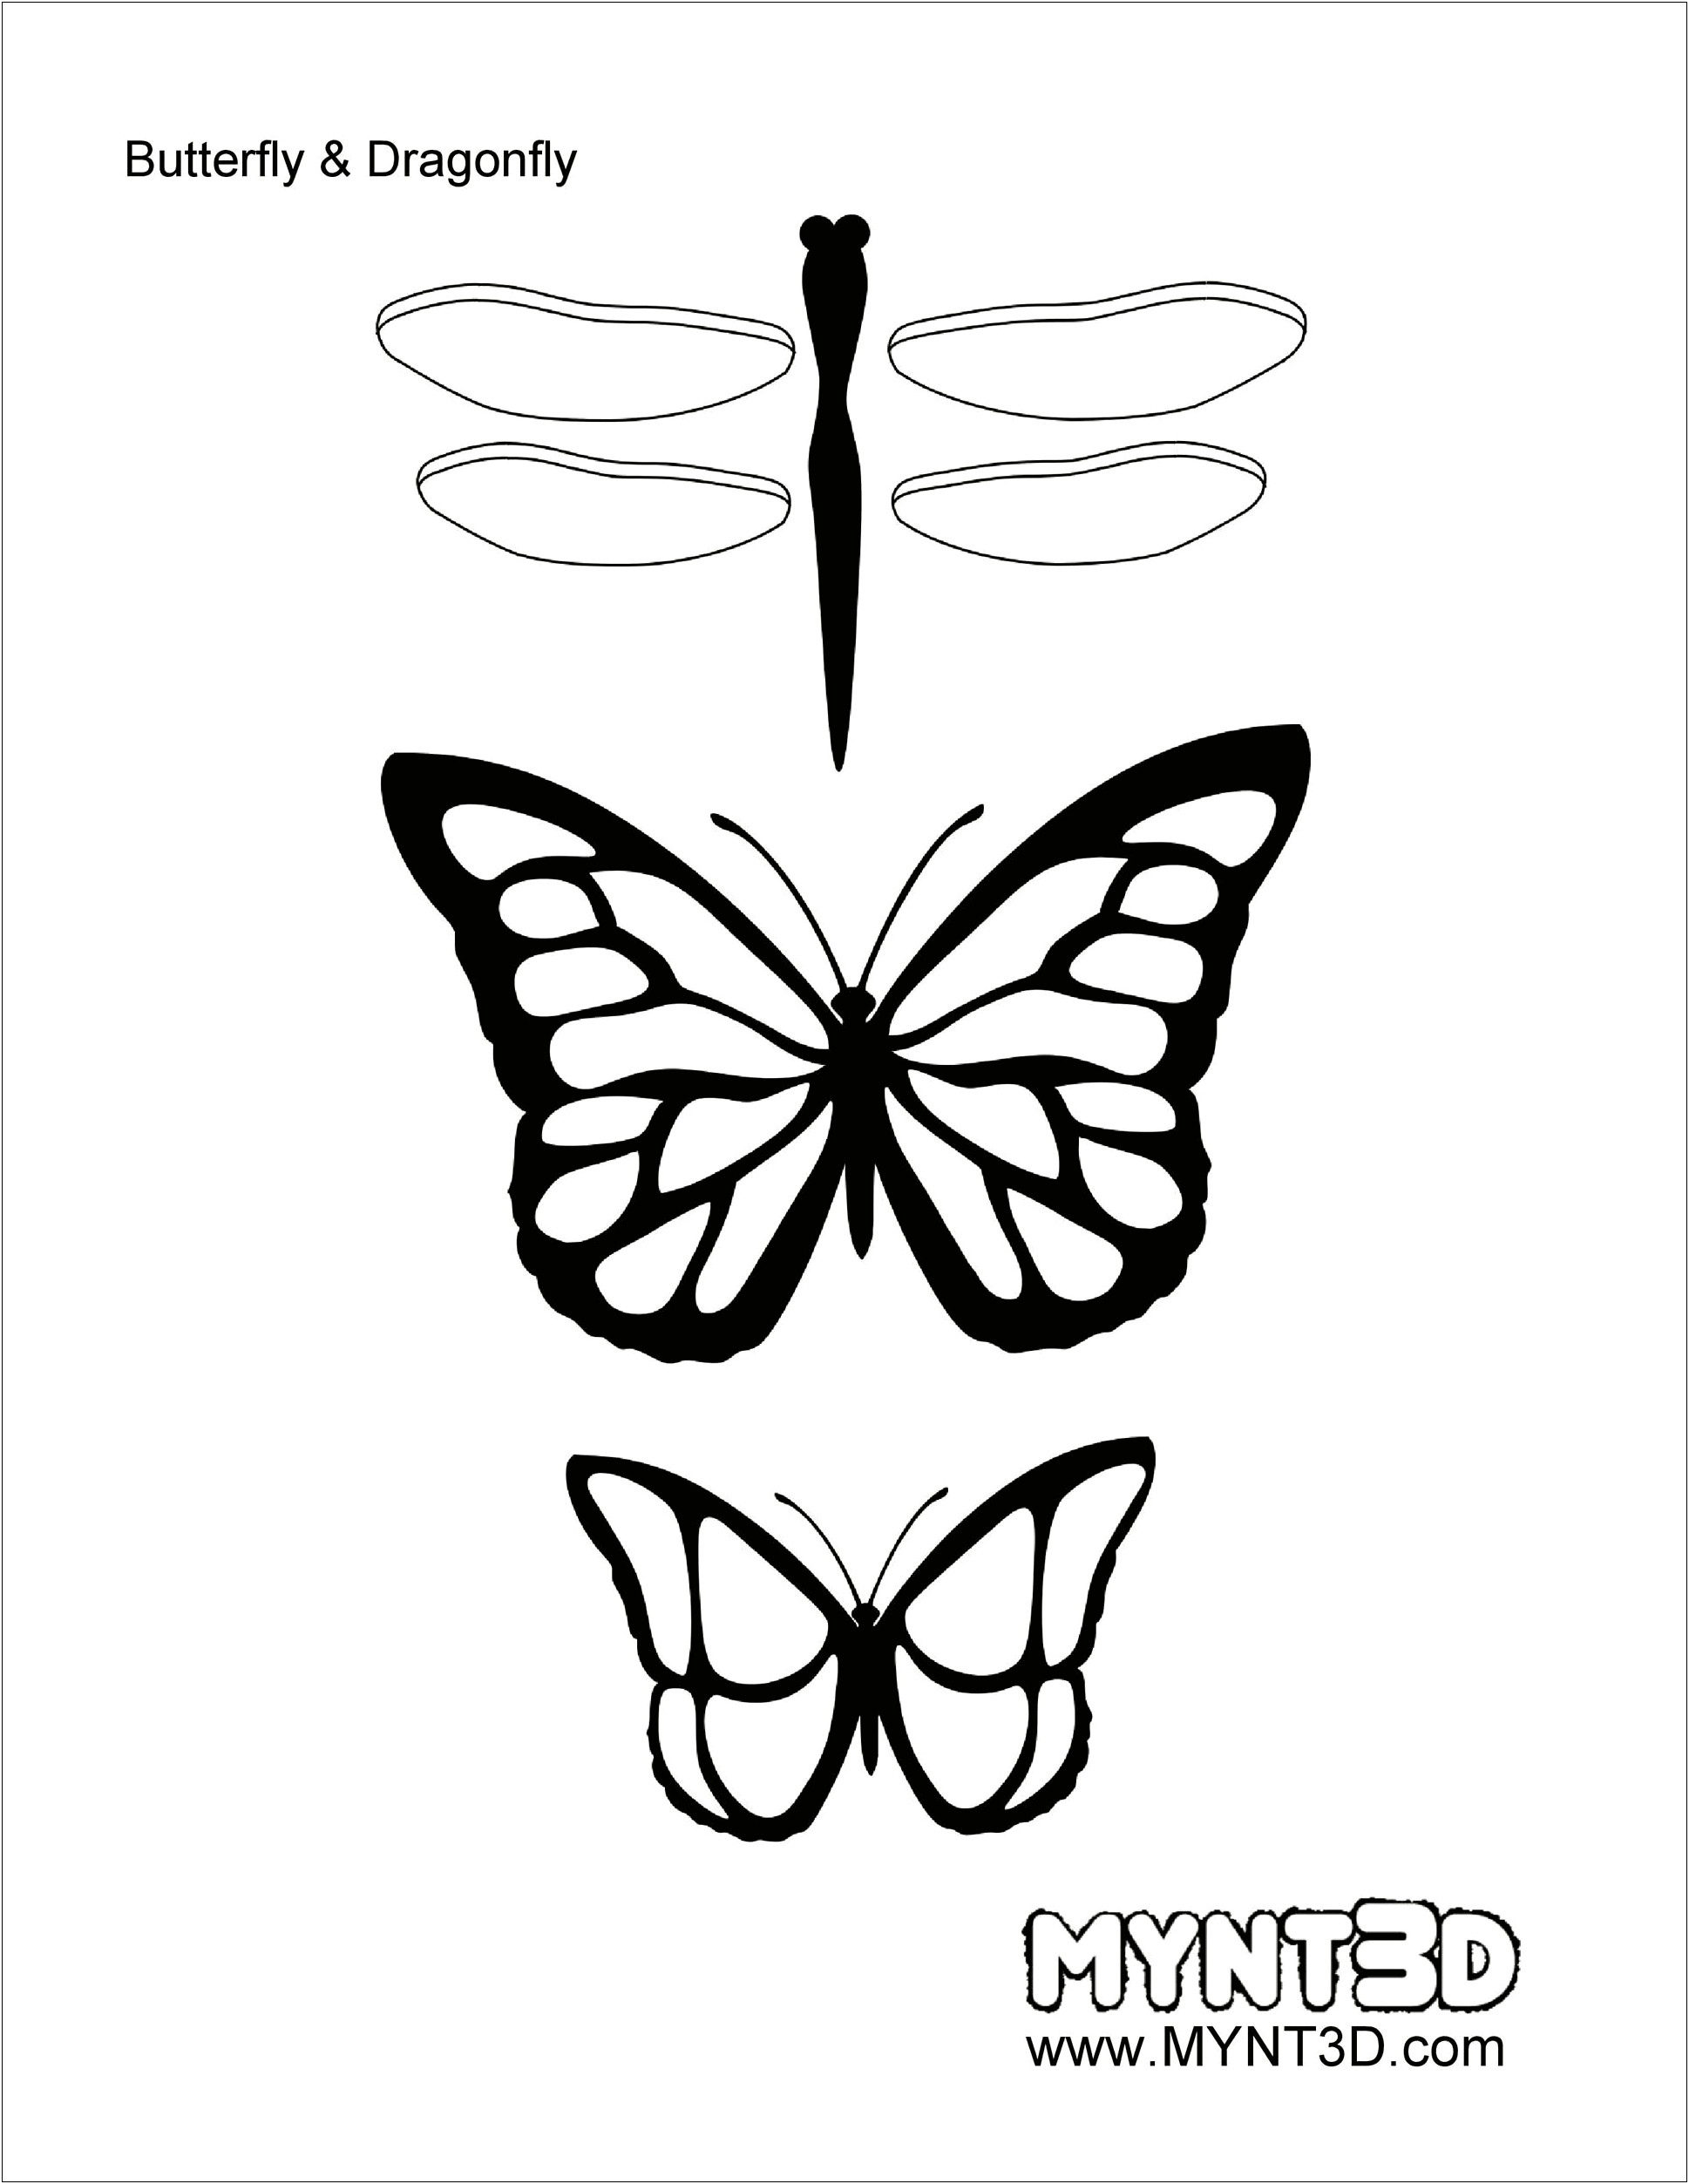 Free Stencil Templates For Butterflies To Print